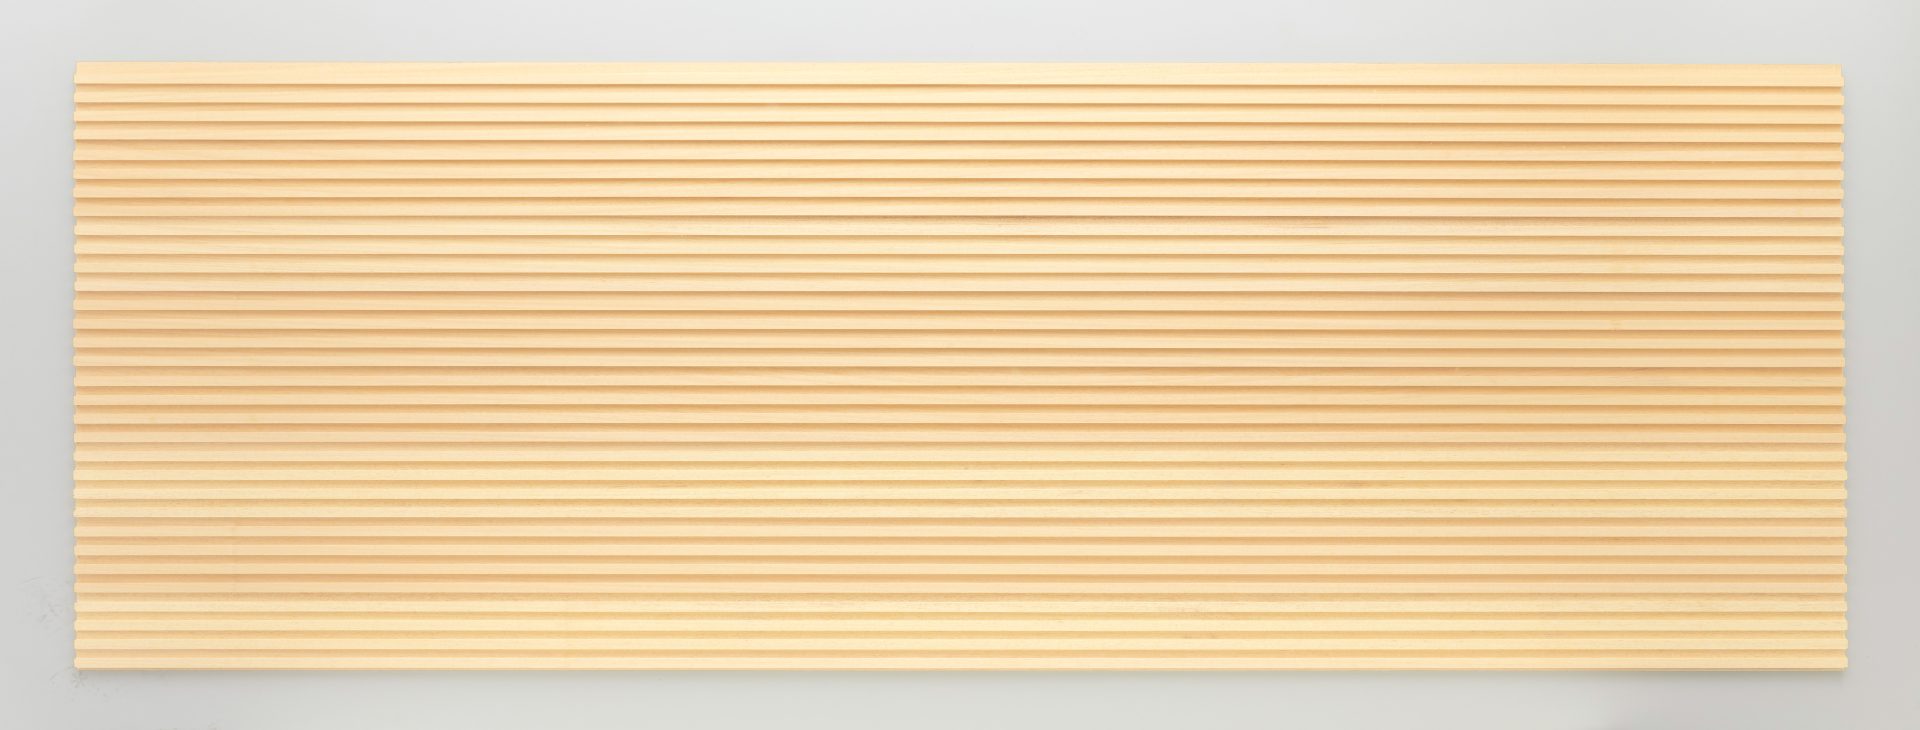 PANELING STANDARD アユース リブ パネリング 無塗装品 2950×13×100